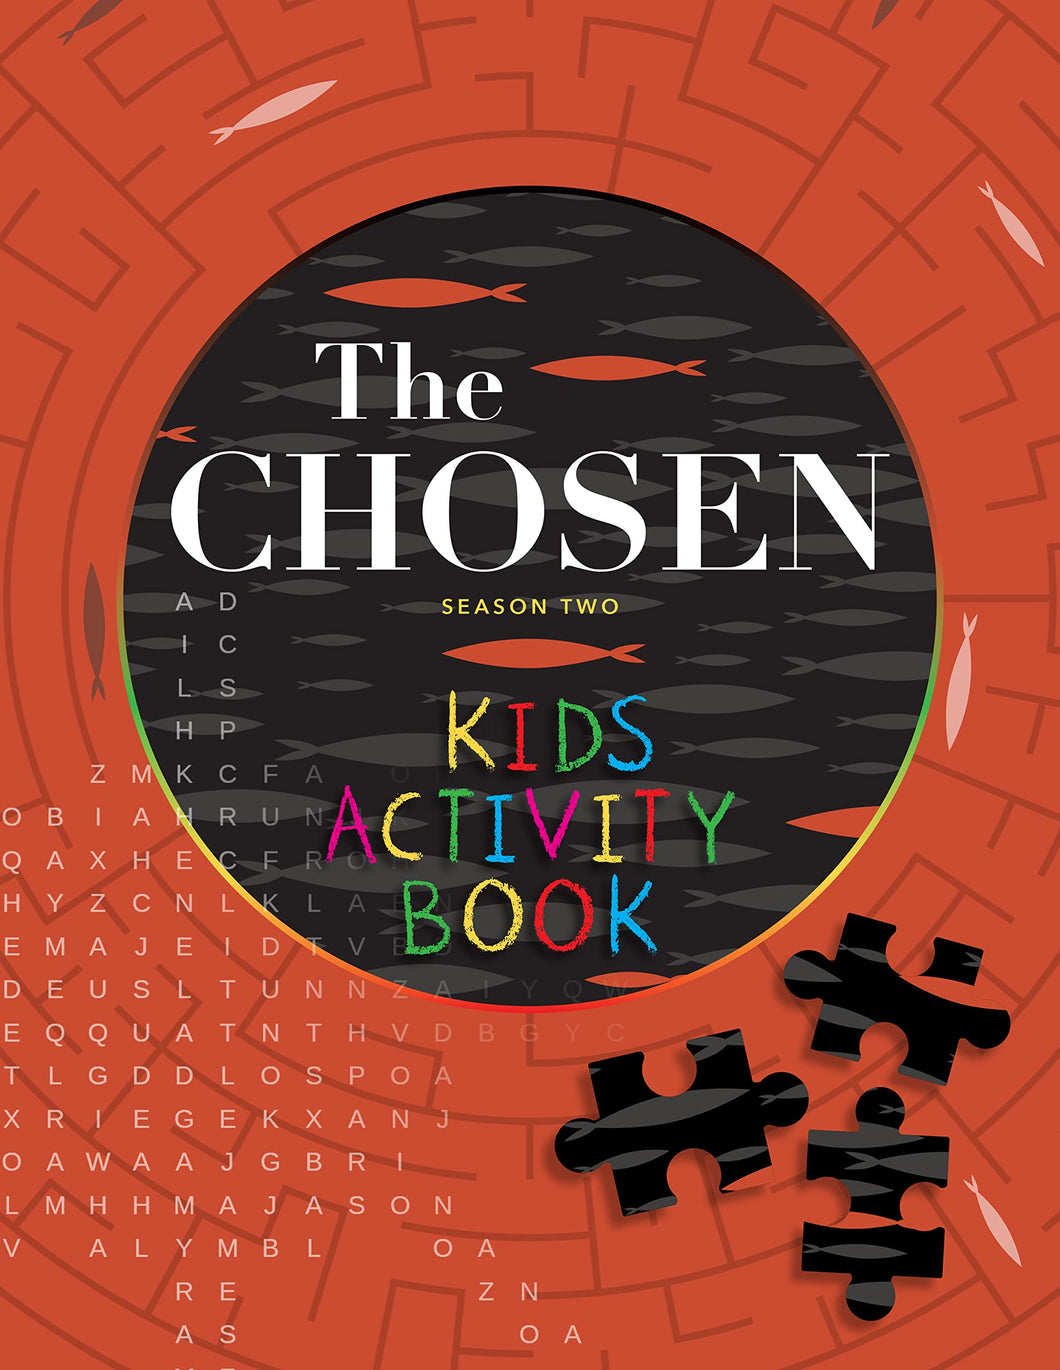 The Chosen (Season Two) Kids Activity Book (Ages 6-12)